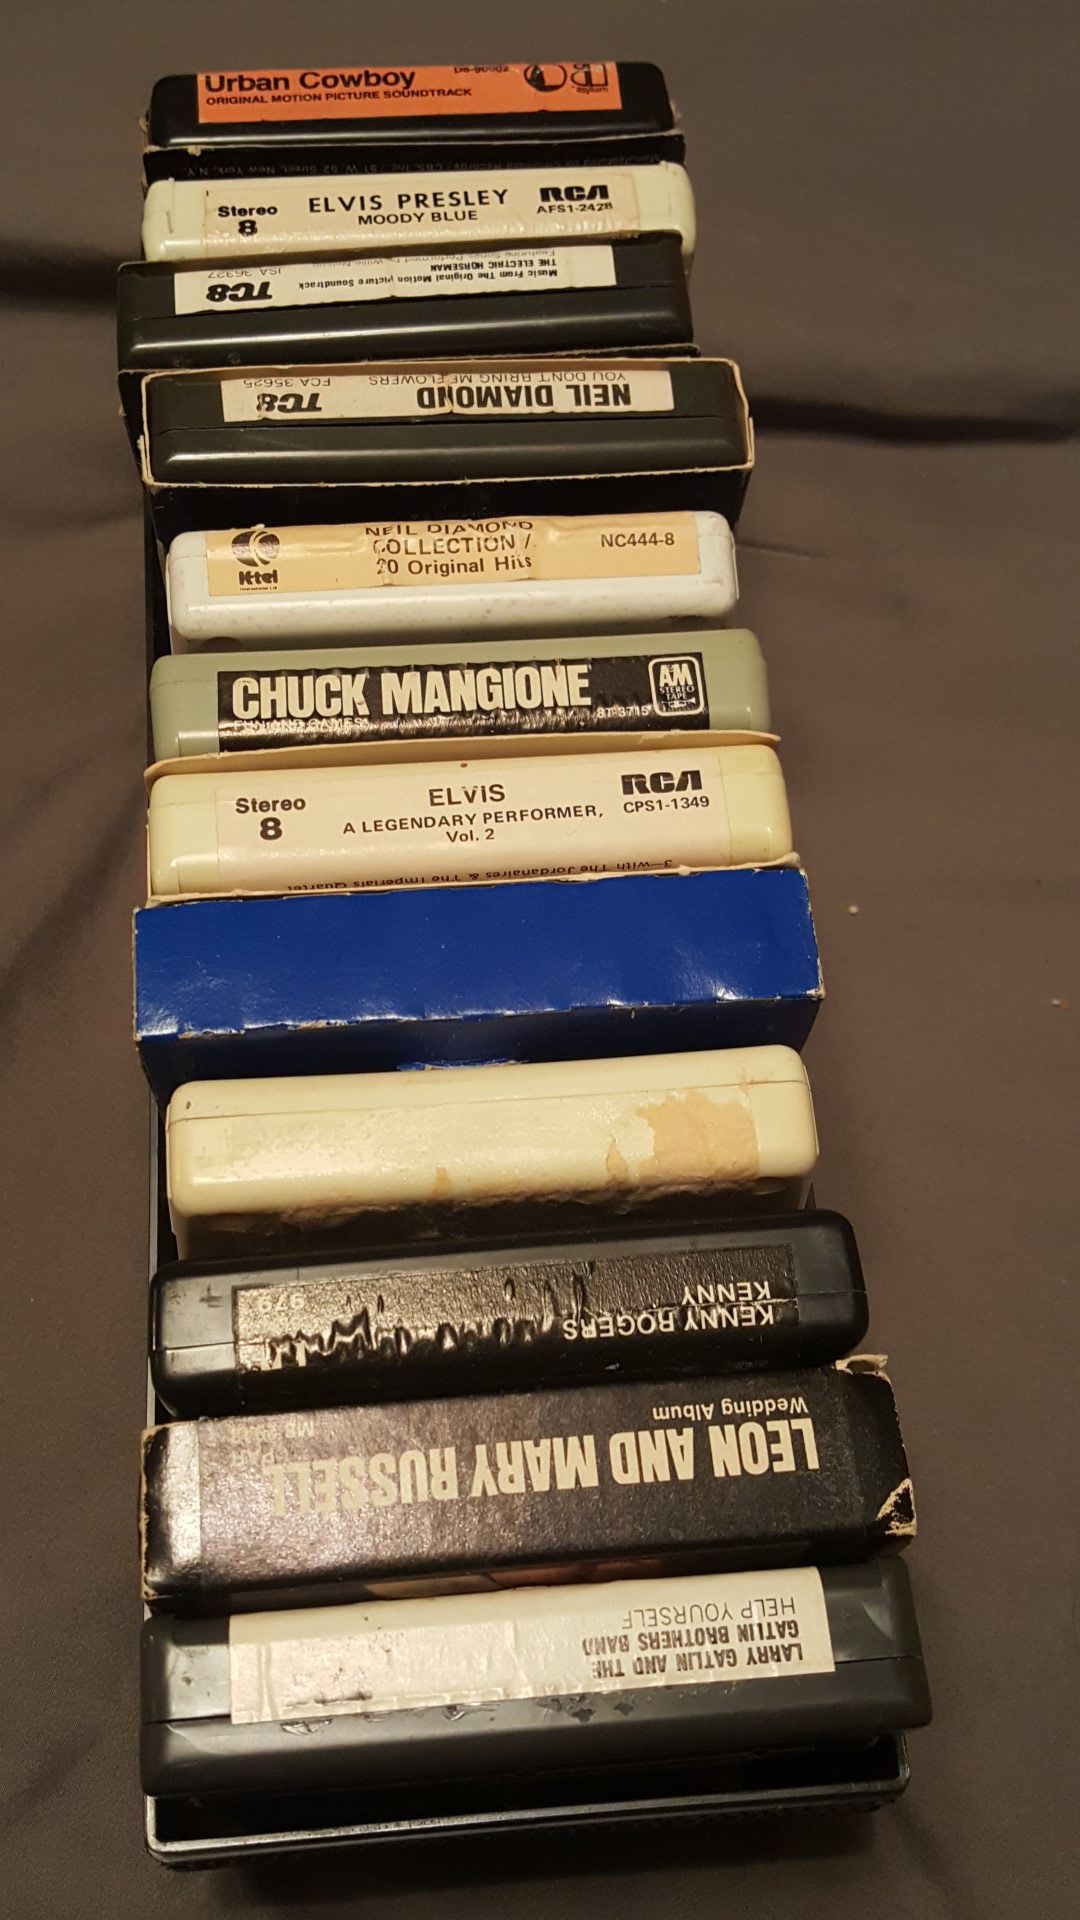 8 track tapes, pink floyd and led zepplin 80s banners